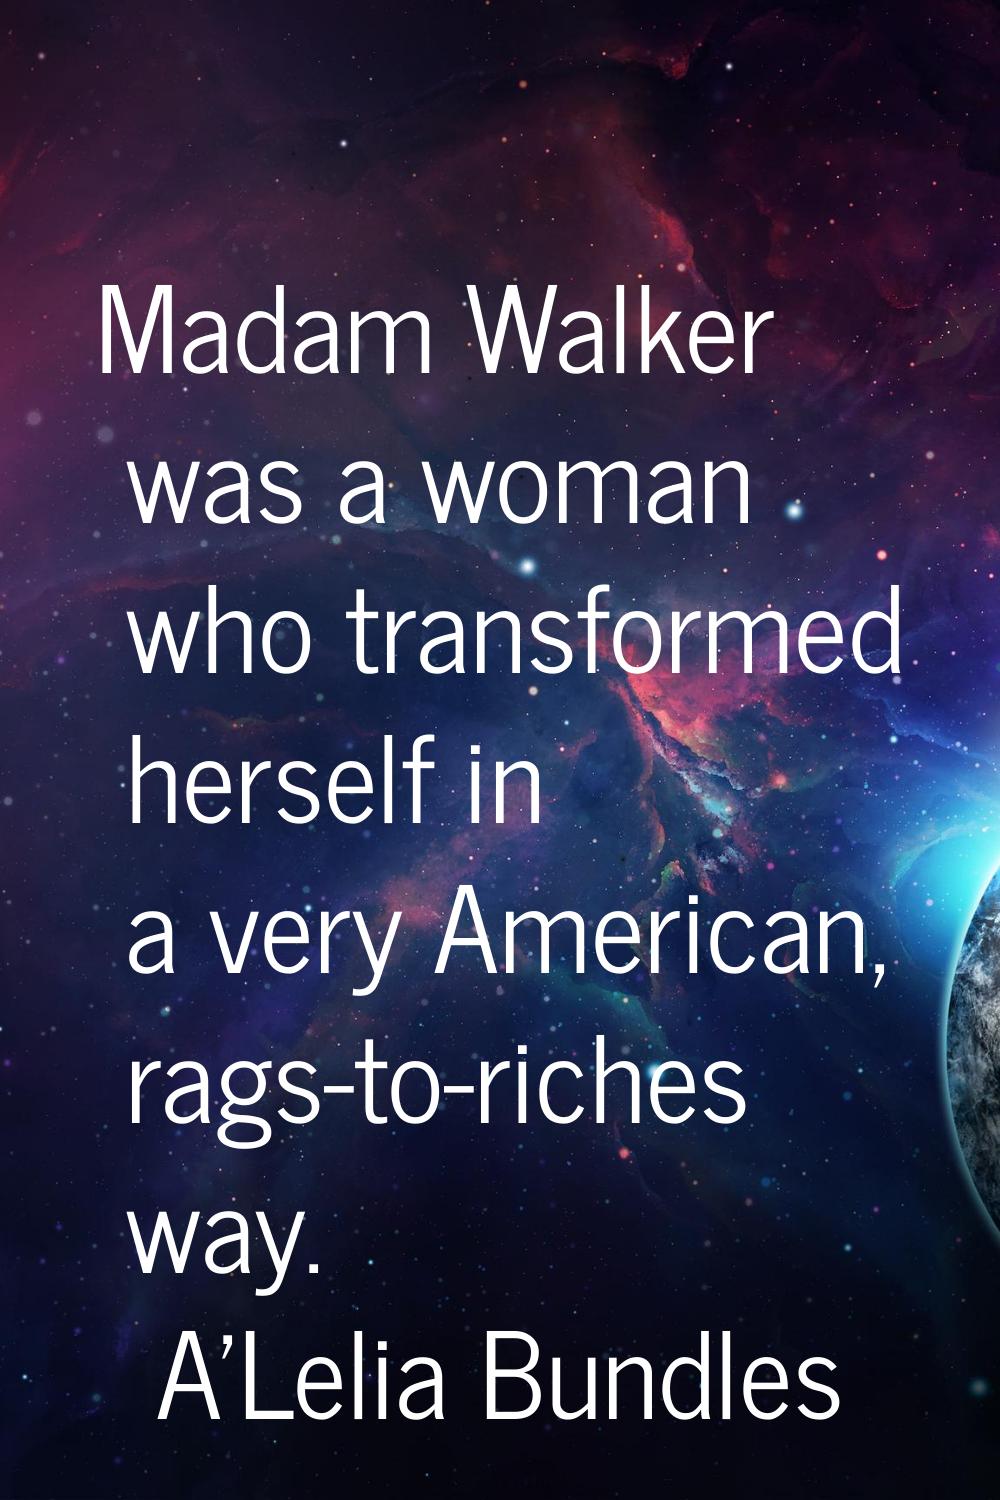 Madam Walker was a woman who transformed herself in a very American, rags-to-riches way.